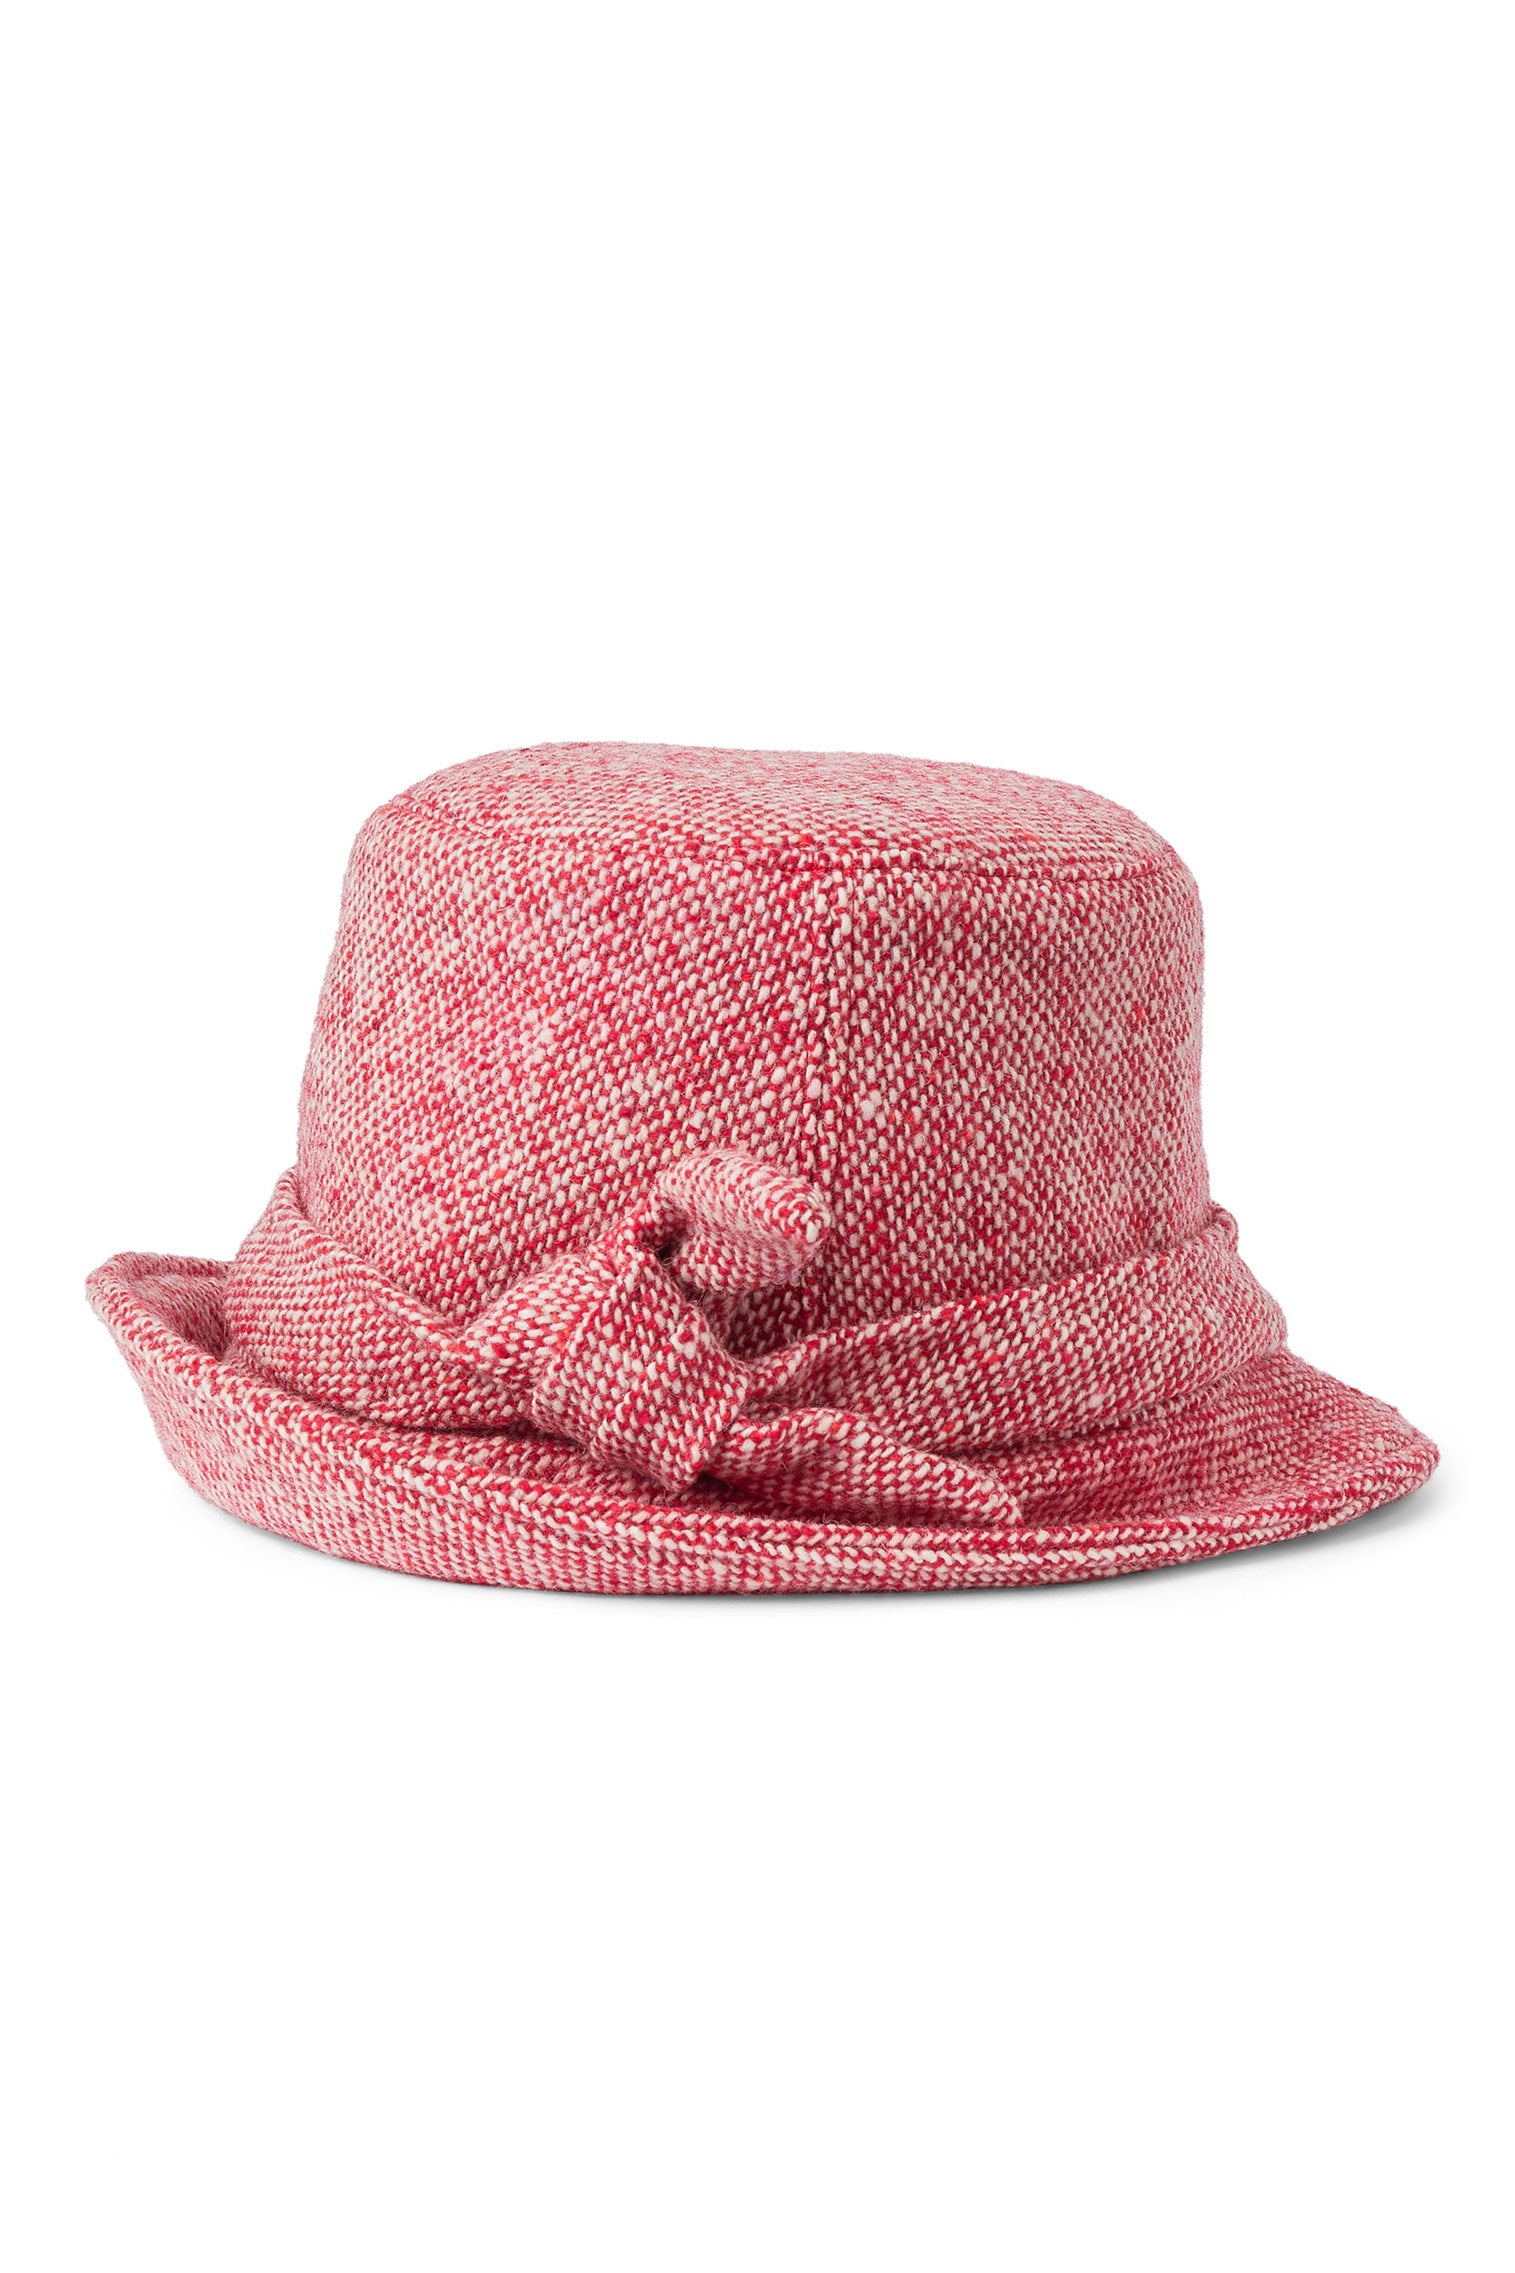 Dolores Red Cloche -  - Lock & Co. Hatters London UK